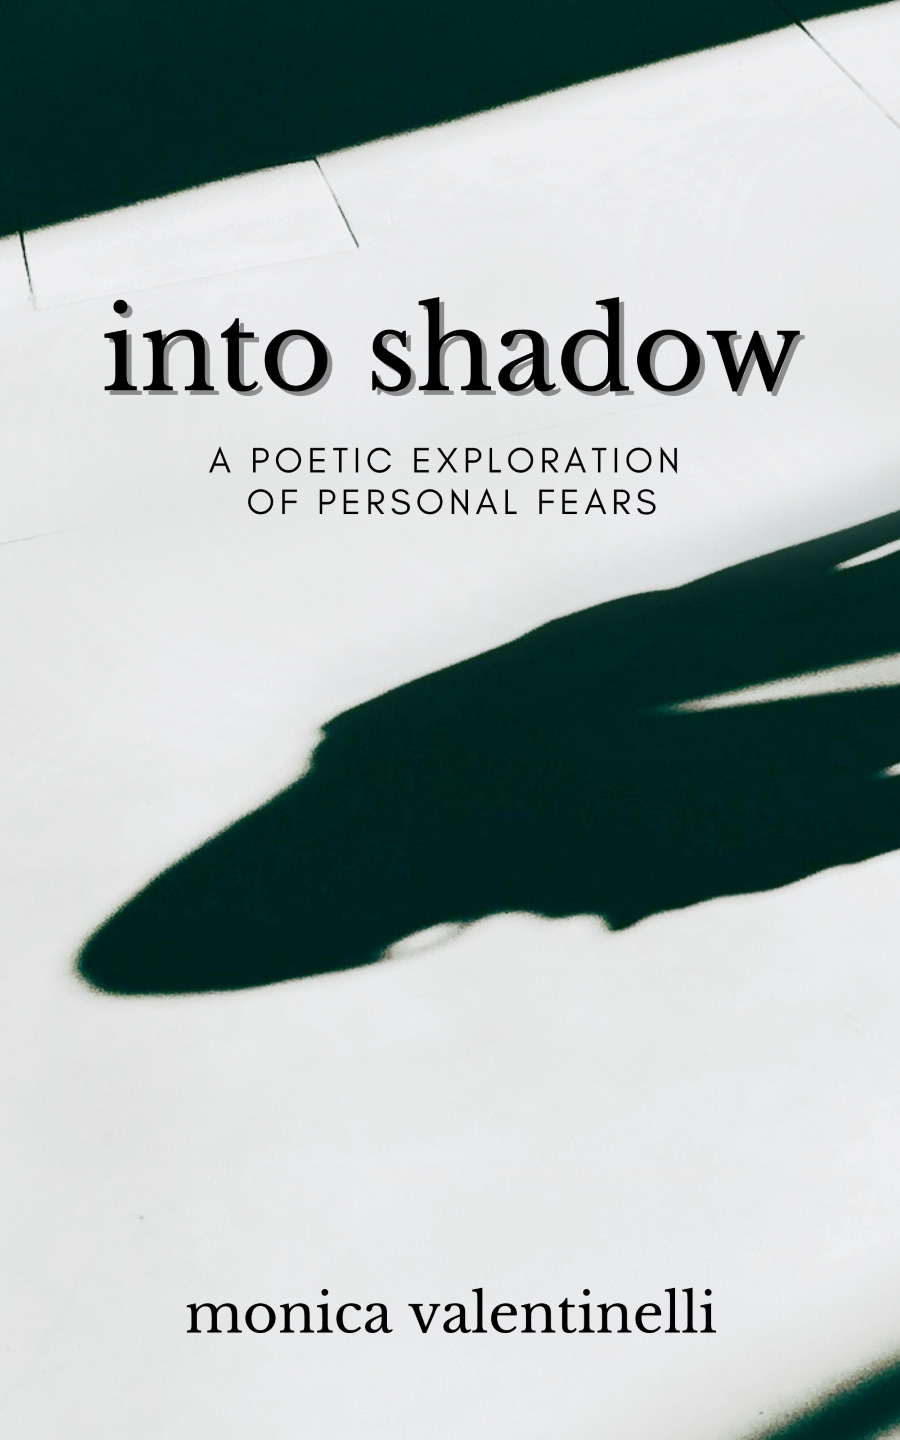 into shadow: a poetic of personal fears | monica valentinelli | black and white picture of a sidewalk with a shadow cast upon it